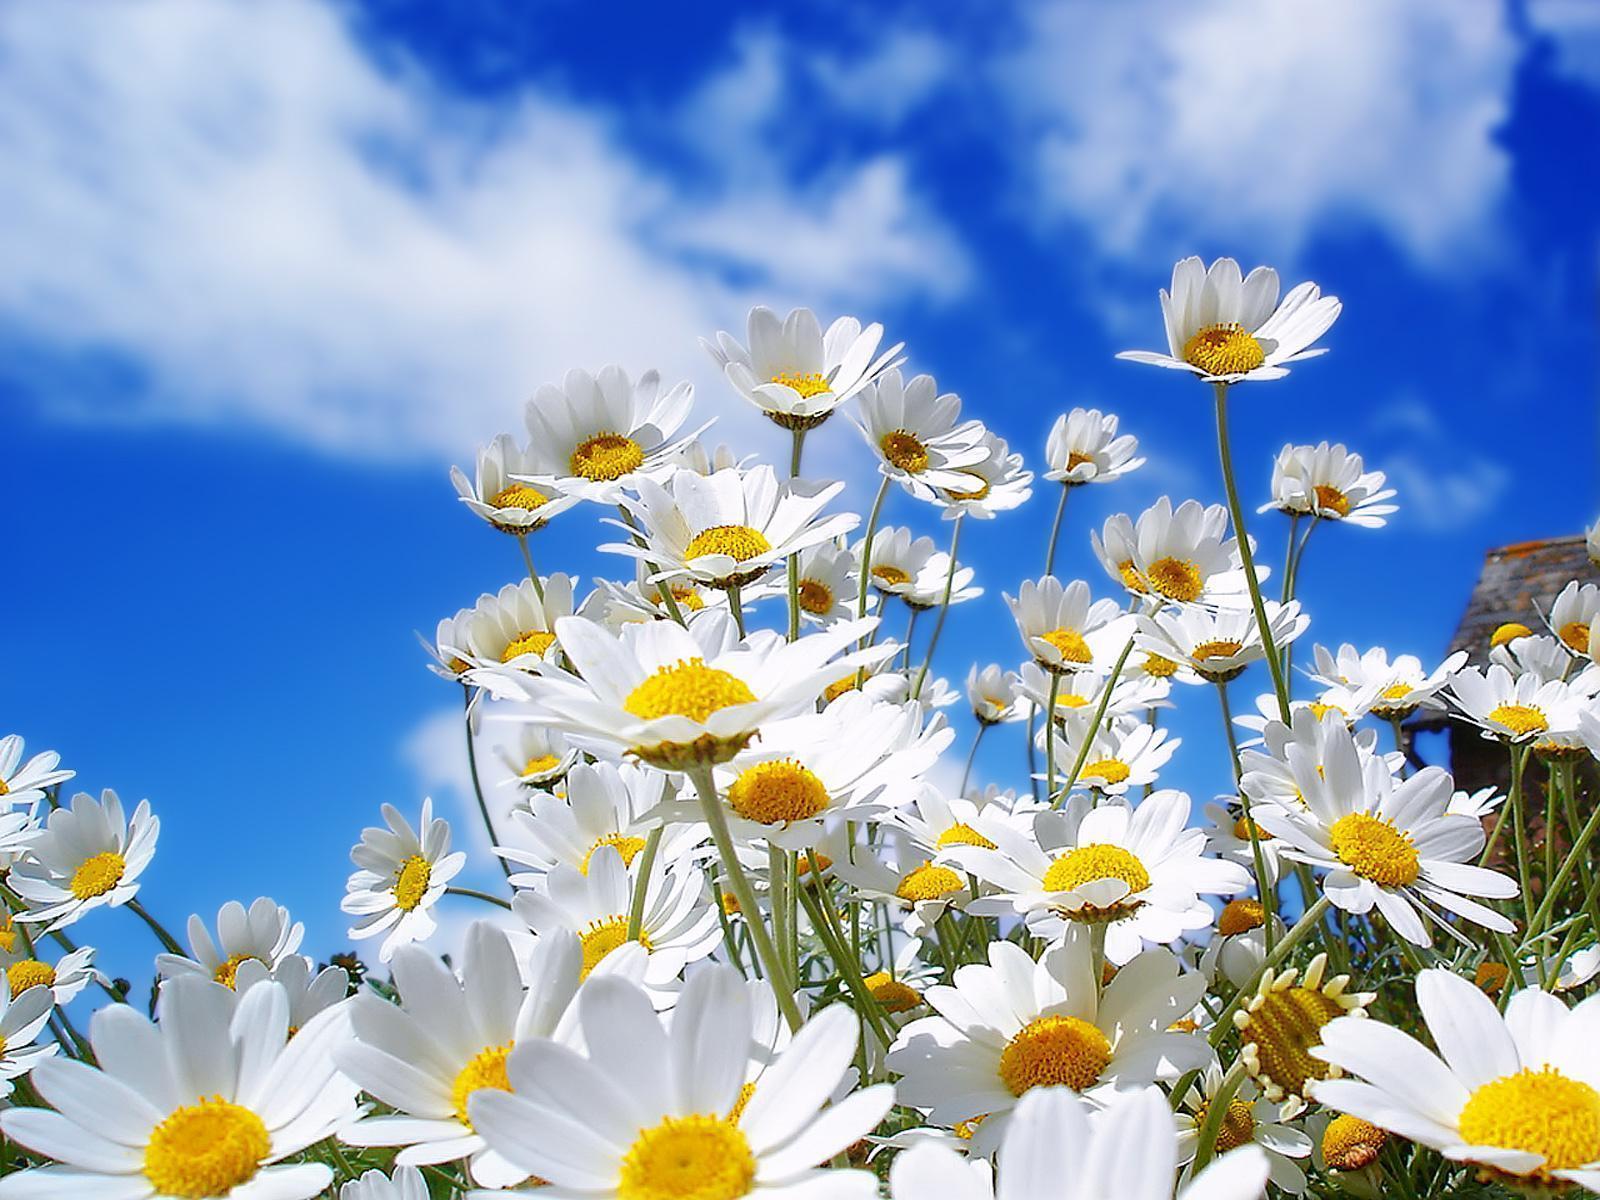 Spring Term Background Picture 5 HD Wallpaper. Hdimges